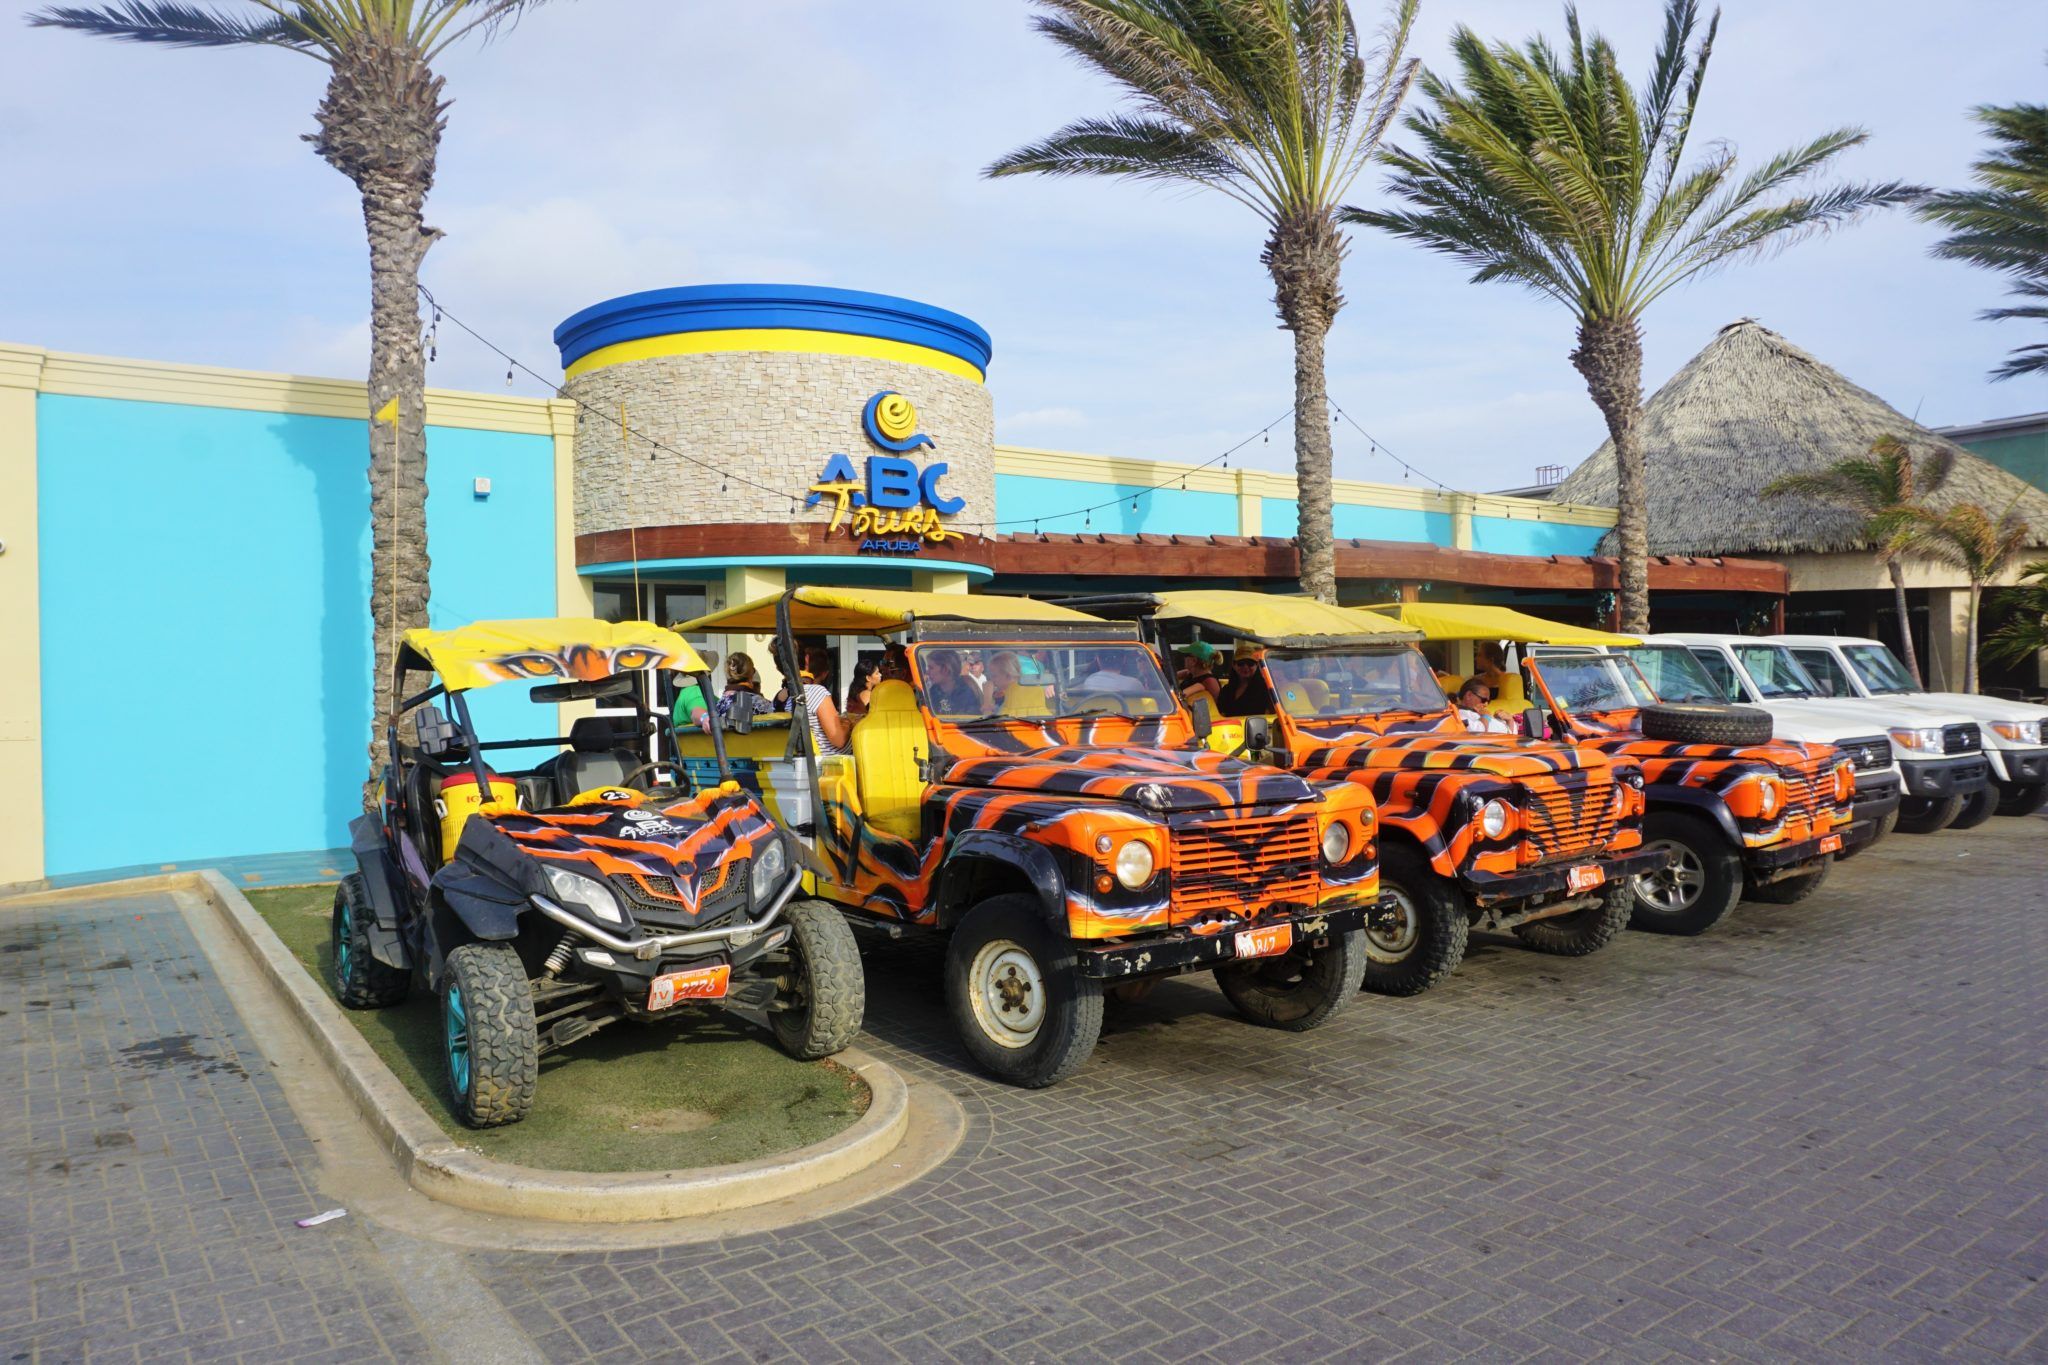 abc tours and attractions aruba